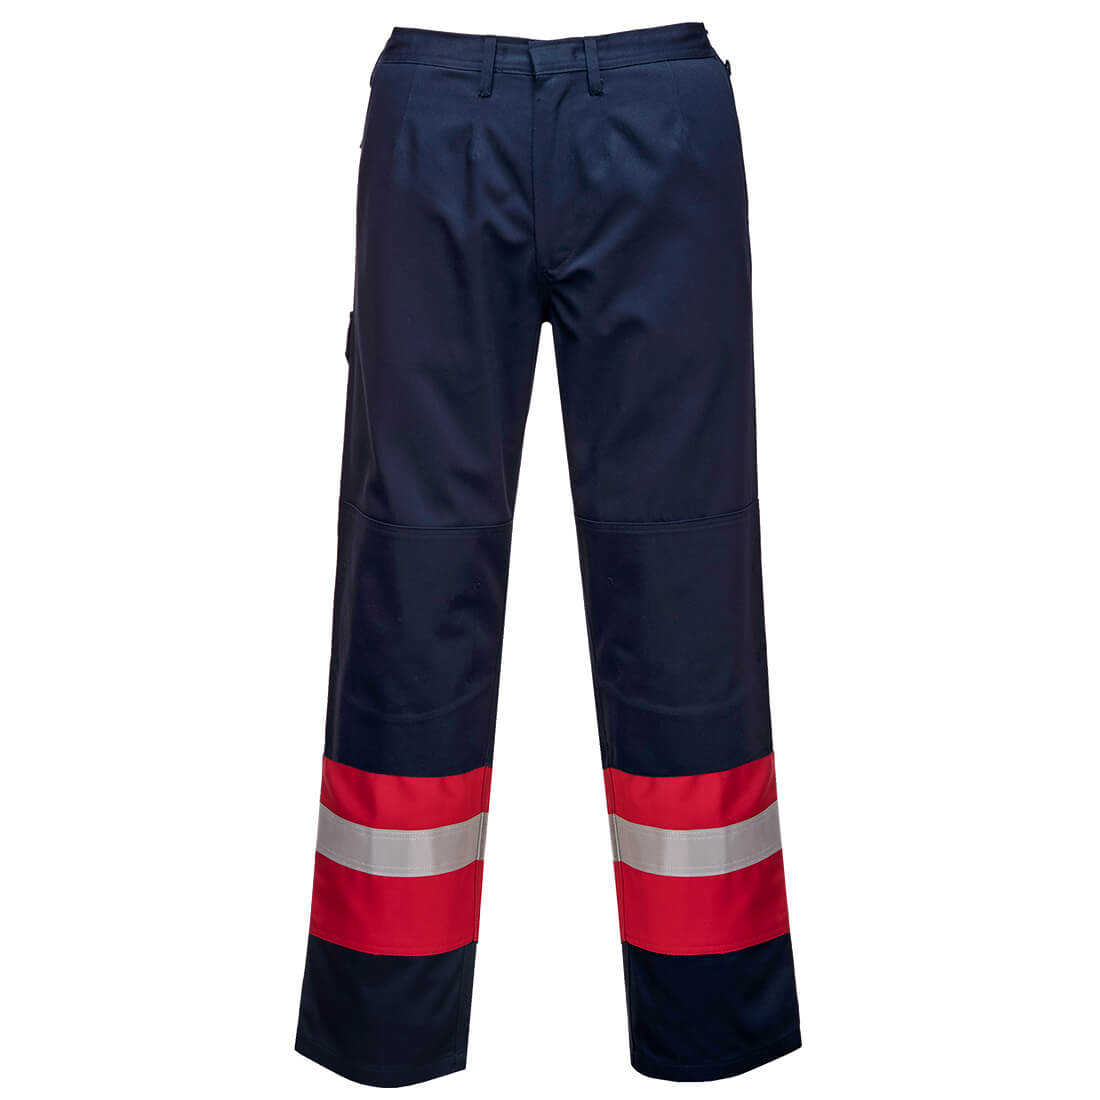 Bizflame Plus™ Flame Resistant Safety Pants